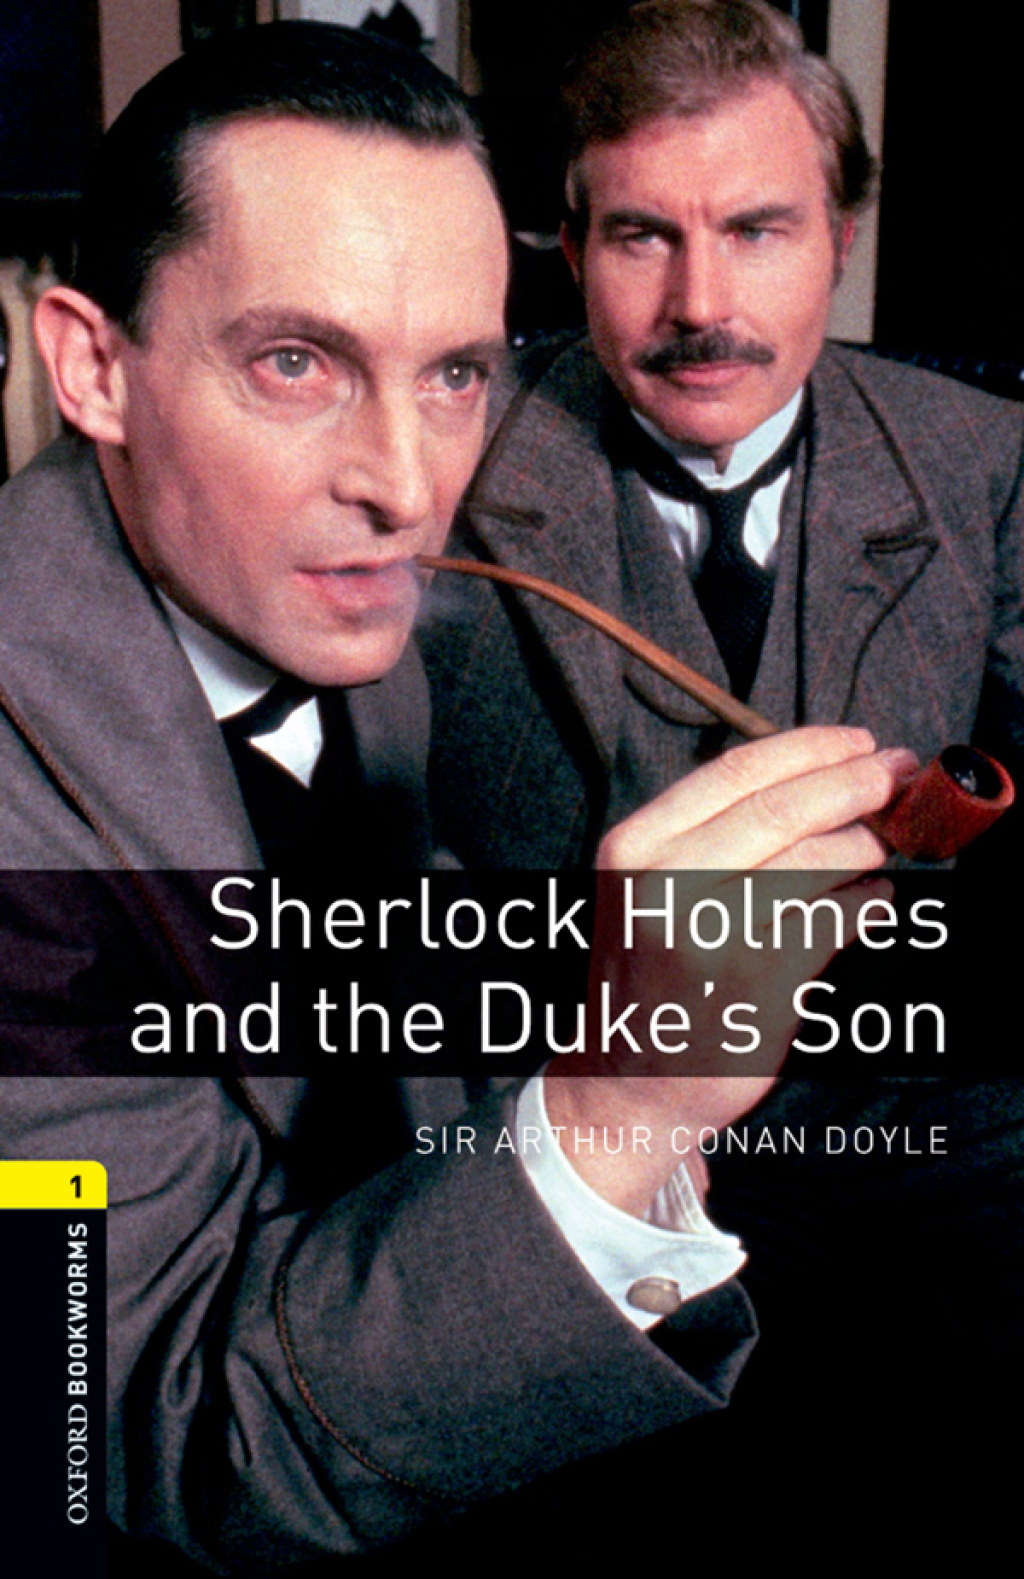 Sherlock Holmes and the Duke's Son Level 1 Oxford Bookworms Library - 3rd Edition (eBook Rental)